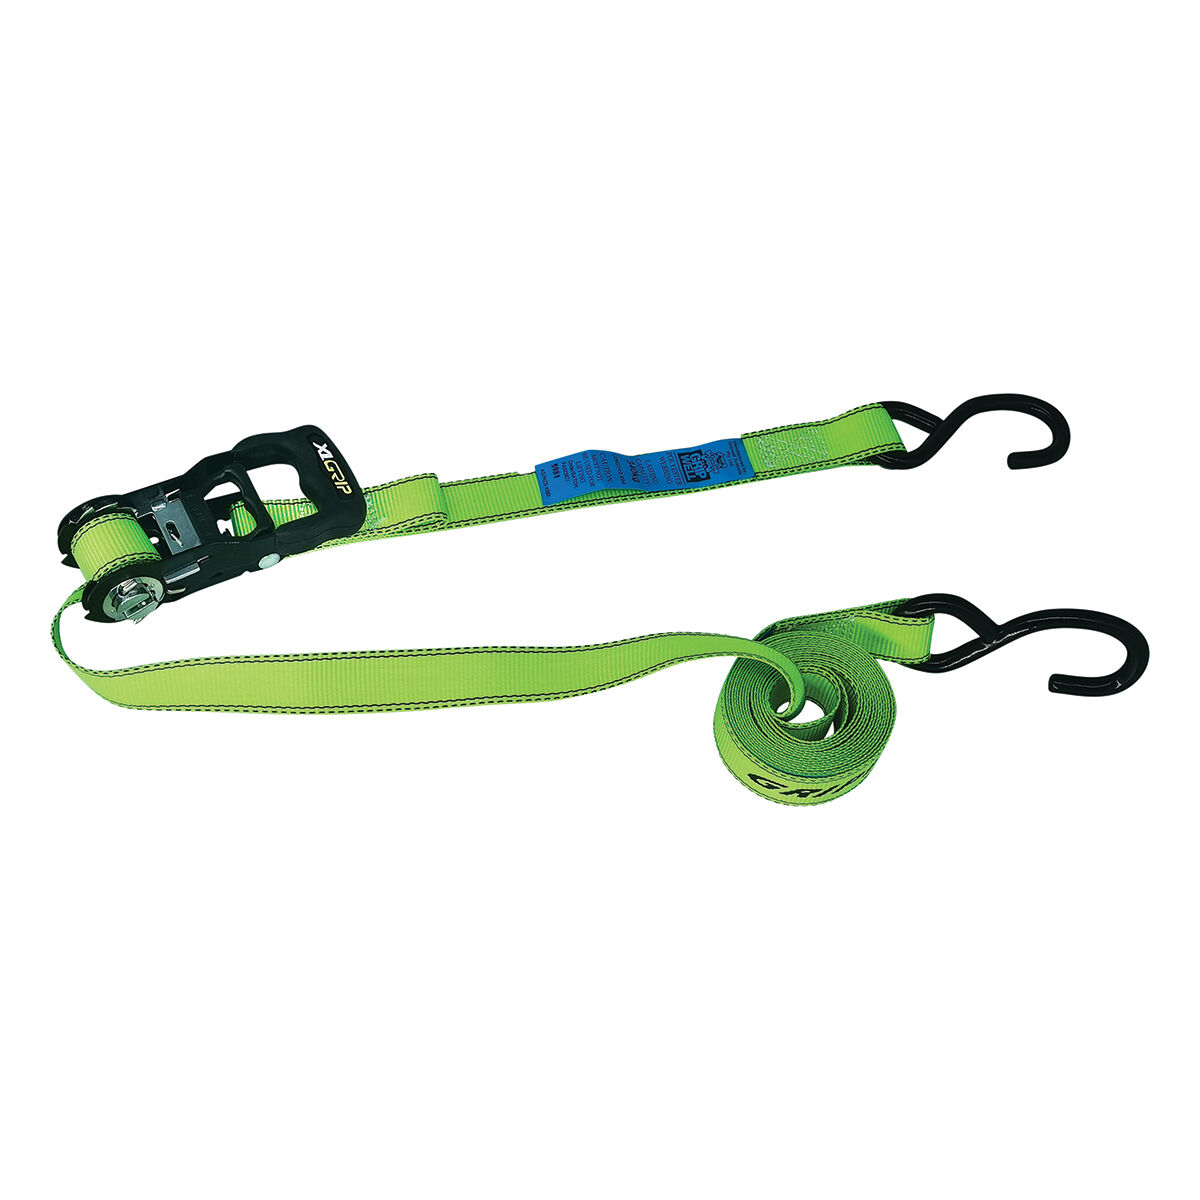 VULCAN Complete Axle Strap Tie Down Kit with Snap Hook Ratchet Straps -  Includes (4) 22 Axle Straps, (4) 36 Axle Straps, And (4) 8' Snap Hook  Ratchet Straps